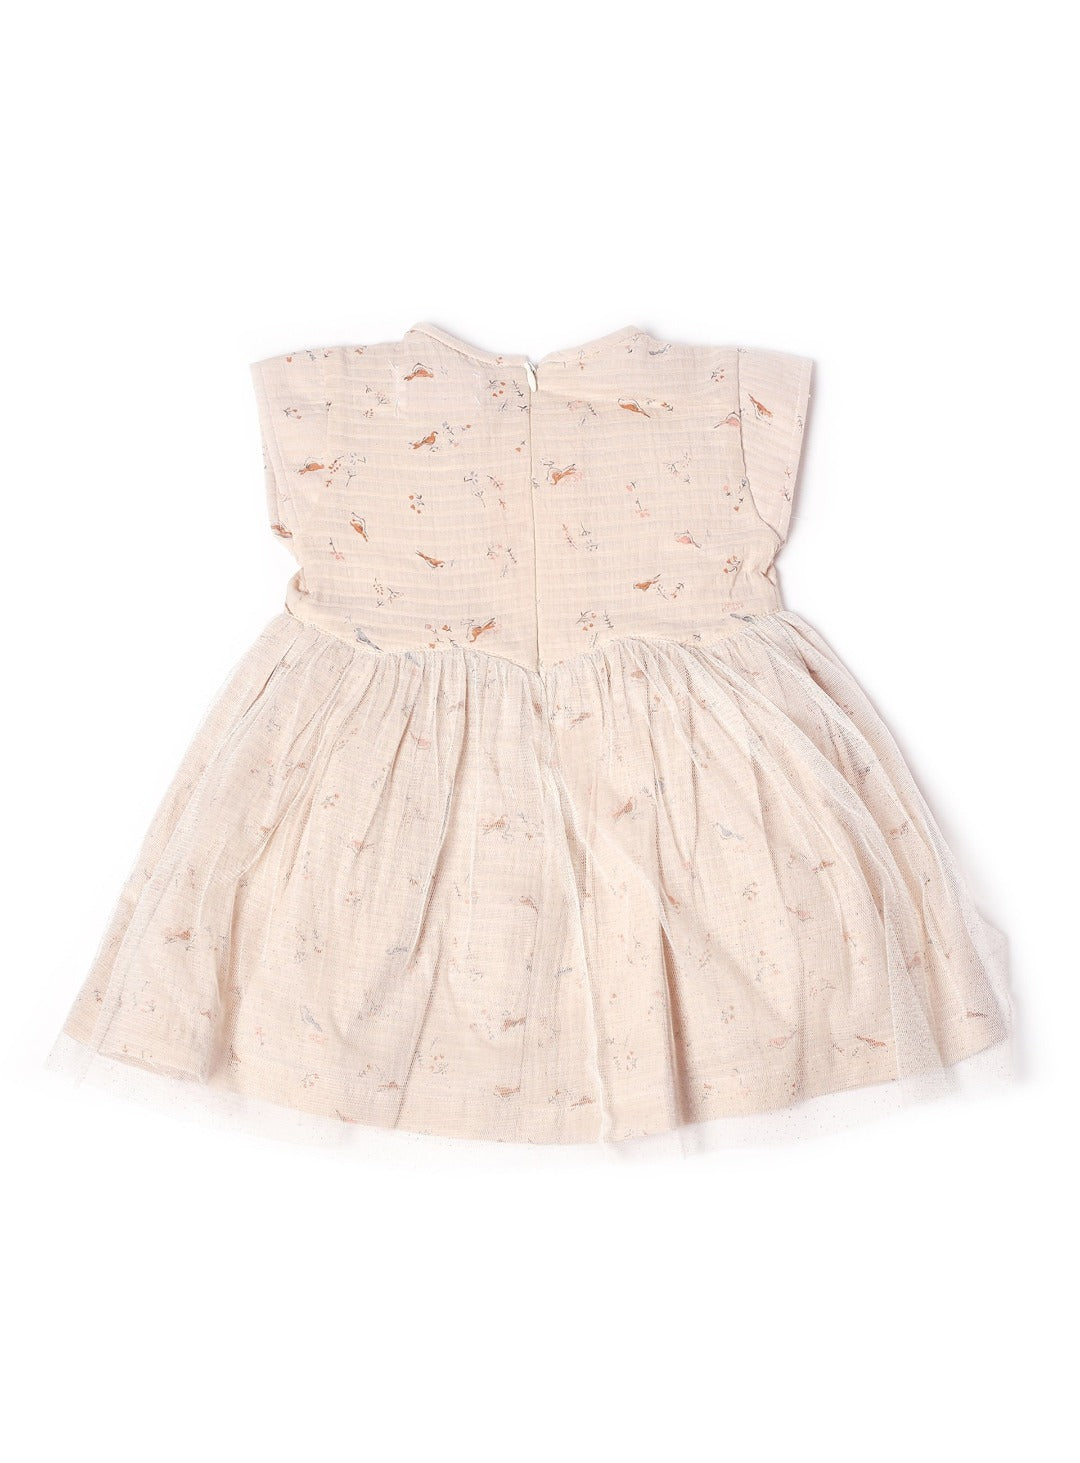 almond milk dress with cute birds and tulle